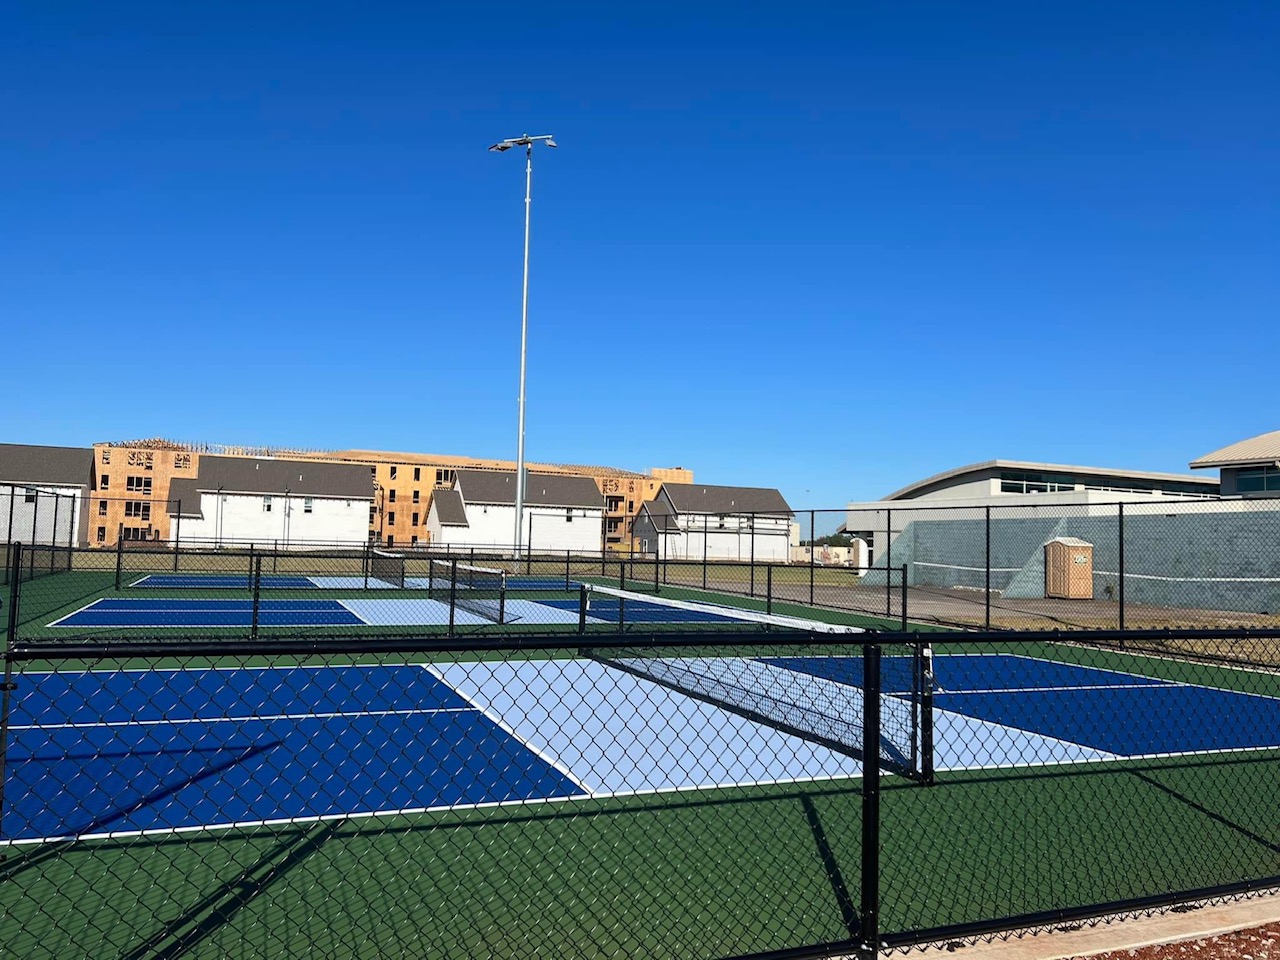 Madison Township is getting ready to provide pickleball enthusiasts with a new place to play their beloved sport. Two pickleball courts are slated to be installed in the spring at Veterans Park, located at 1747 Hubbard Road.